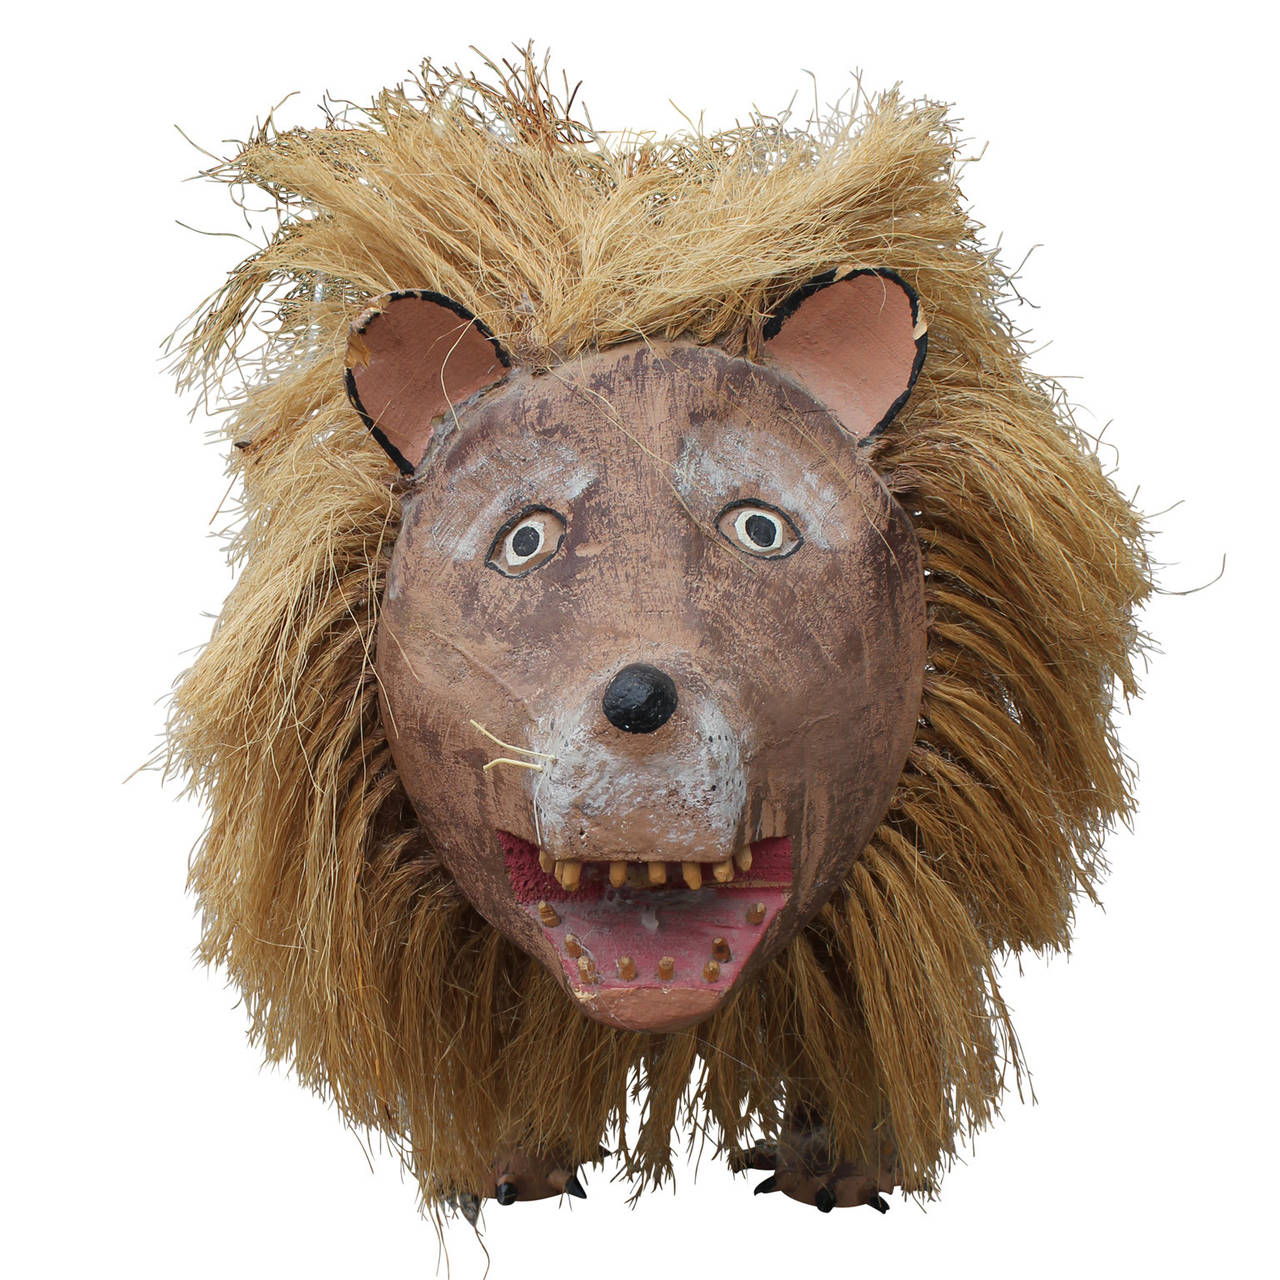 Awesome Hand carved lion sculpture by artist David Alvarez. Lion has a wild twine mane and three dimensional claws and teeth. Great conversation piece!